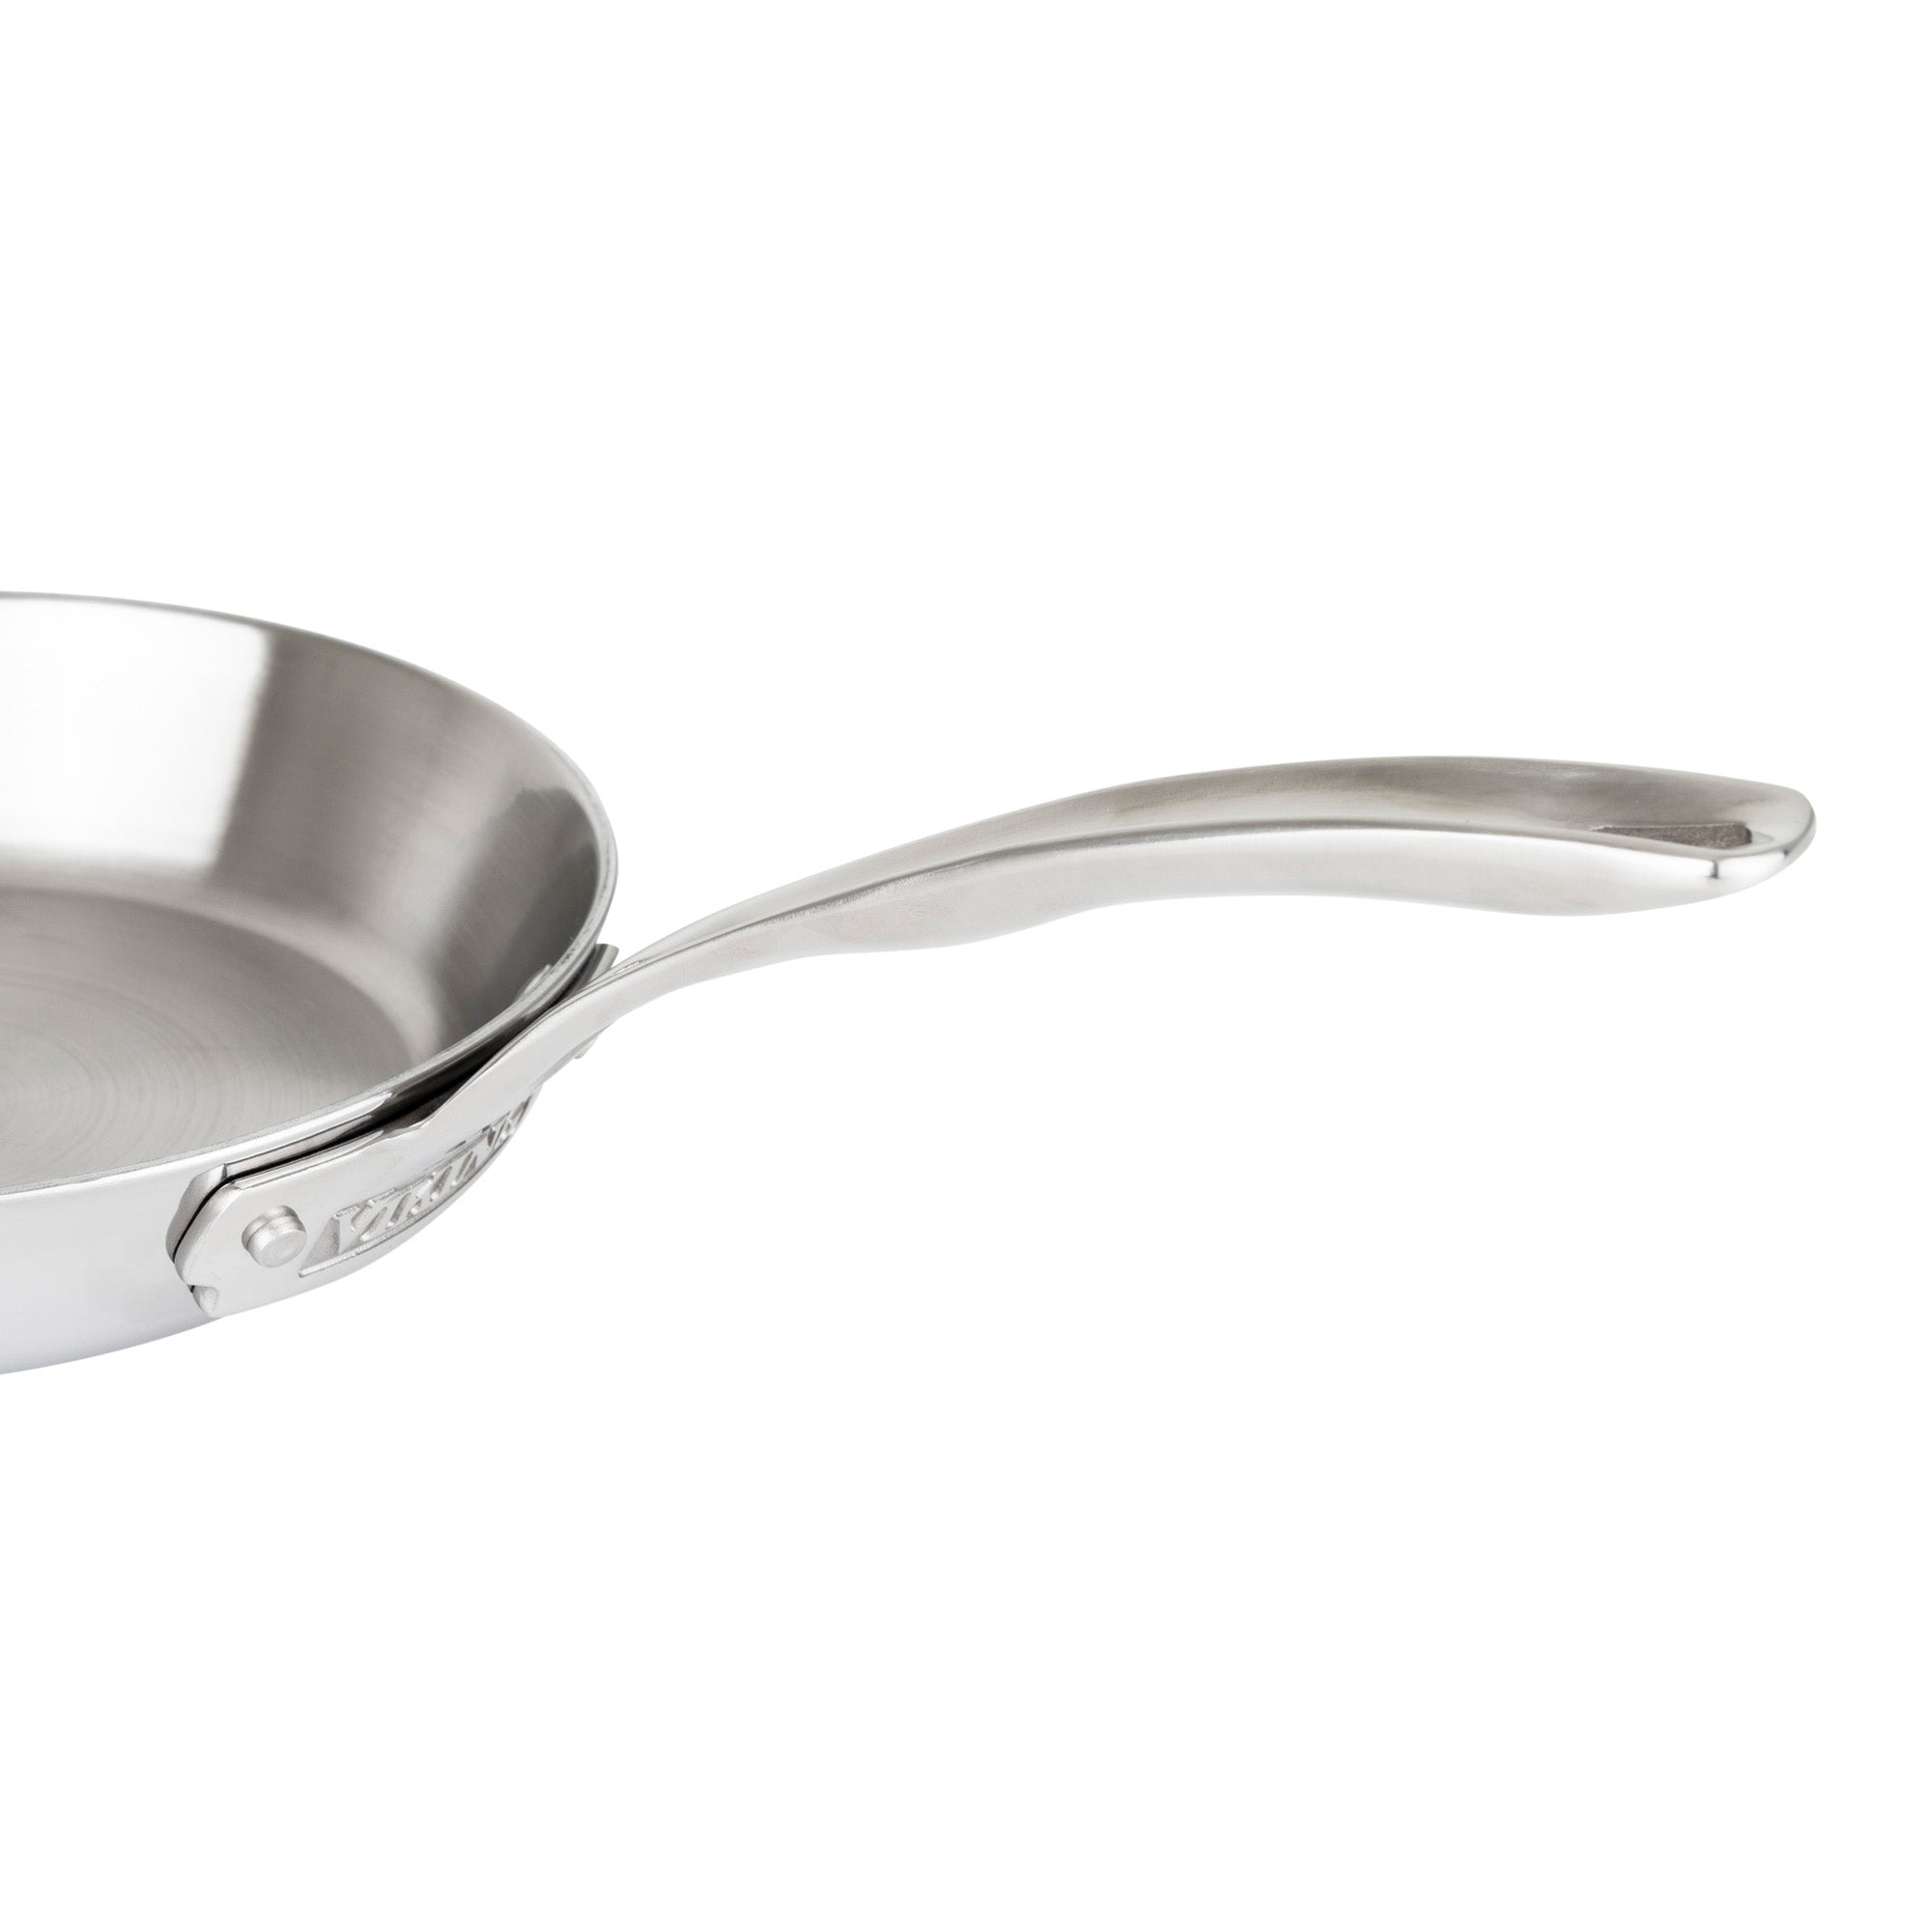 Viking Contemporary 3-Ply Stainless Steel 8 Nonstick Fry Pan